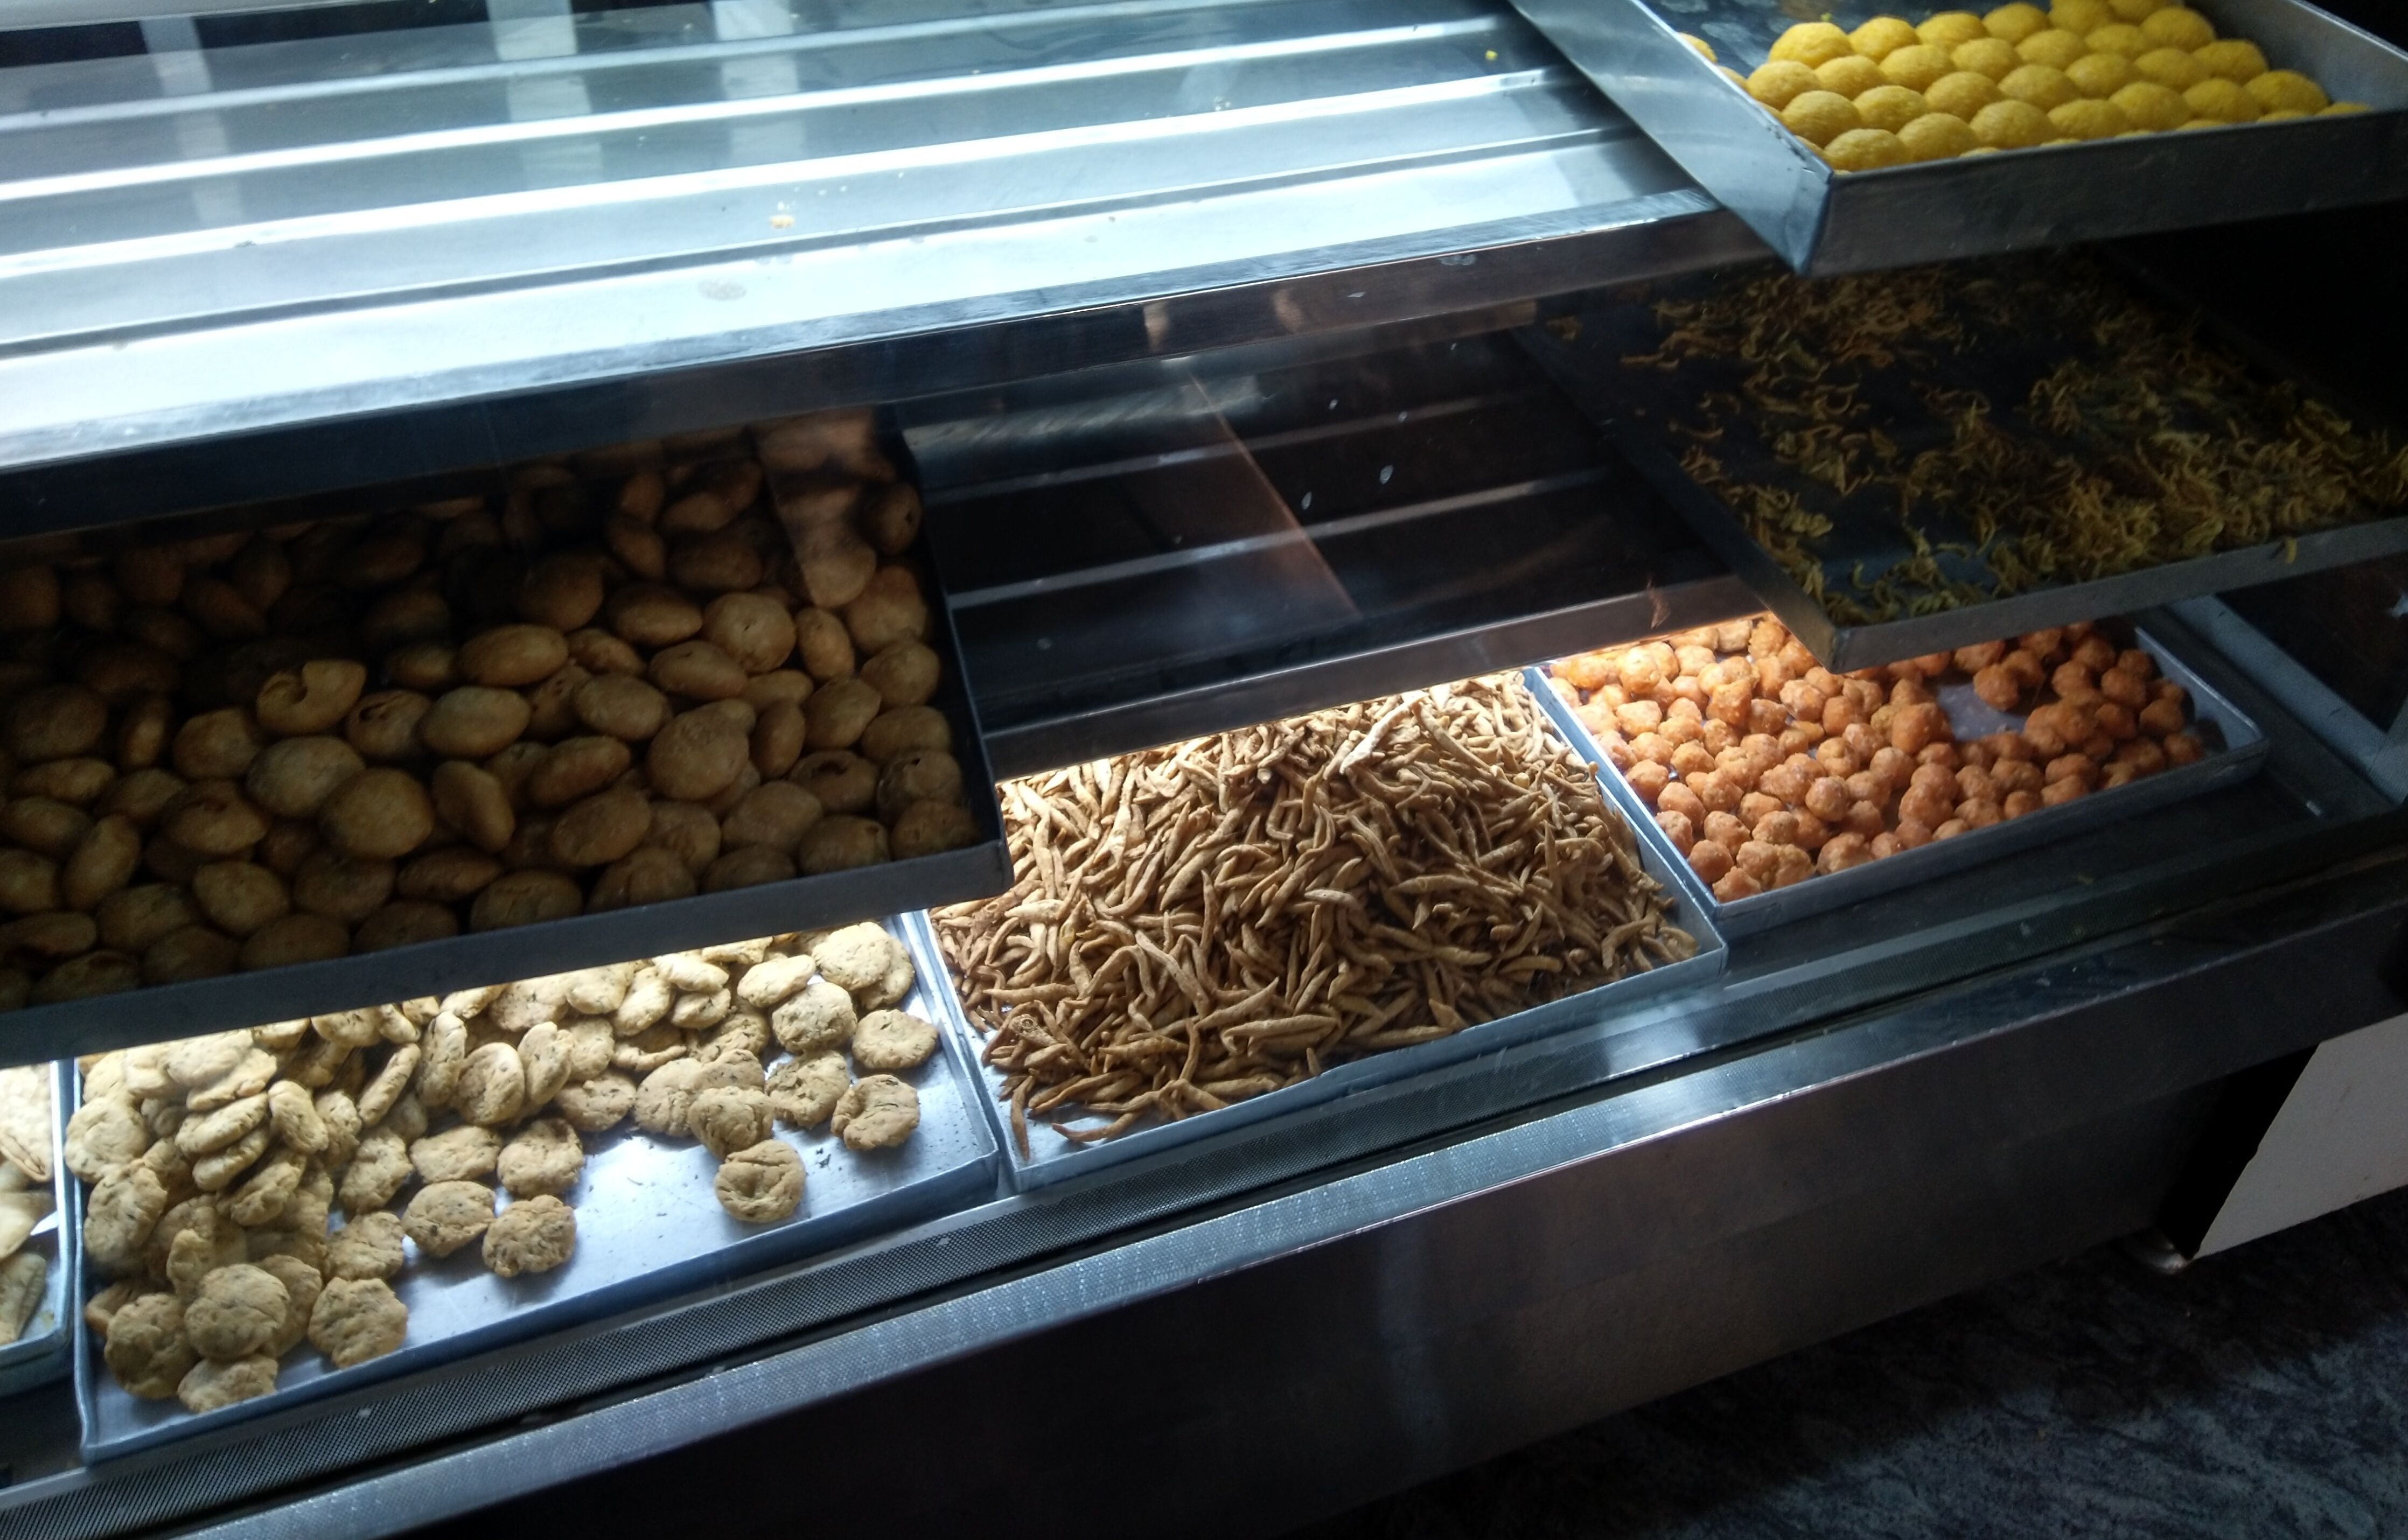 This snacks available at the local store. People in India like to have them in the evening with tea. These are Matthias, namakparas, shakkarparas, laddoos, kachori in the local languages.